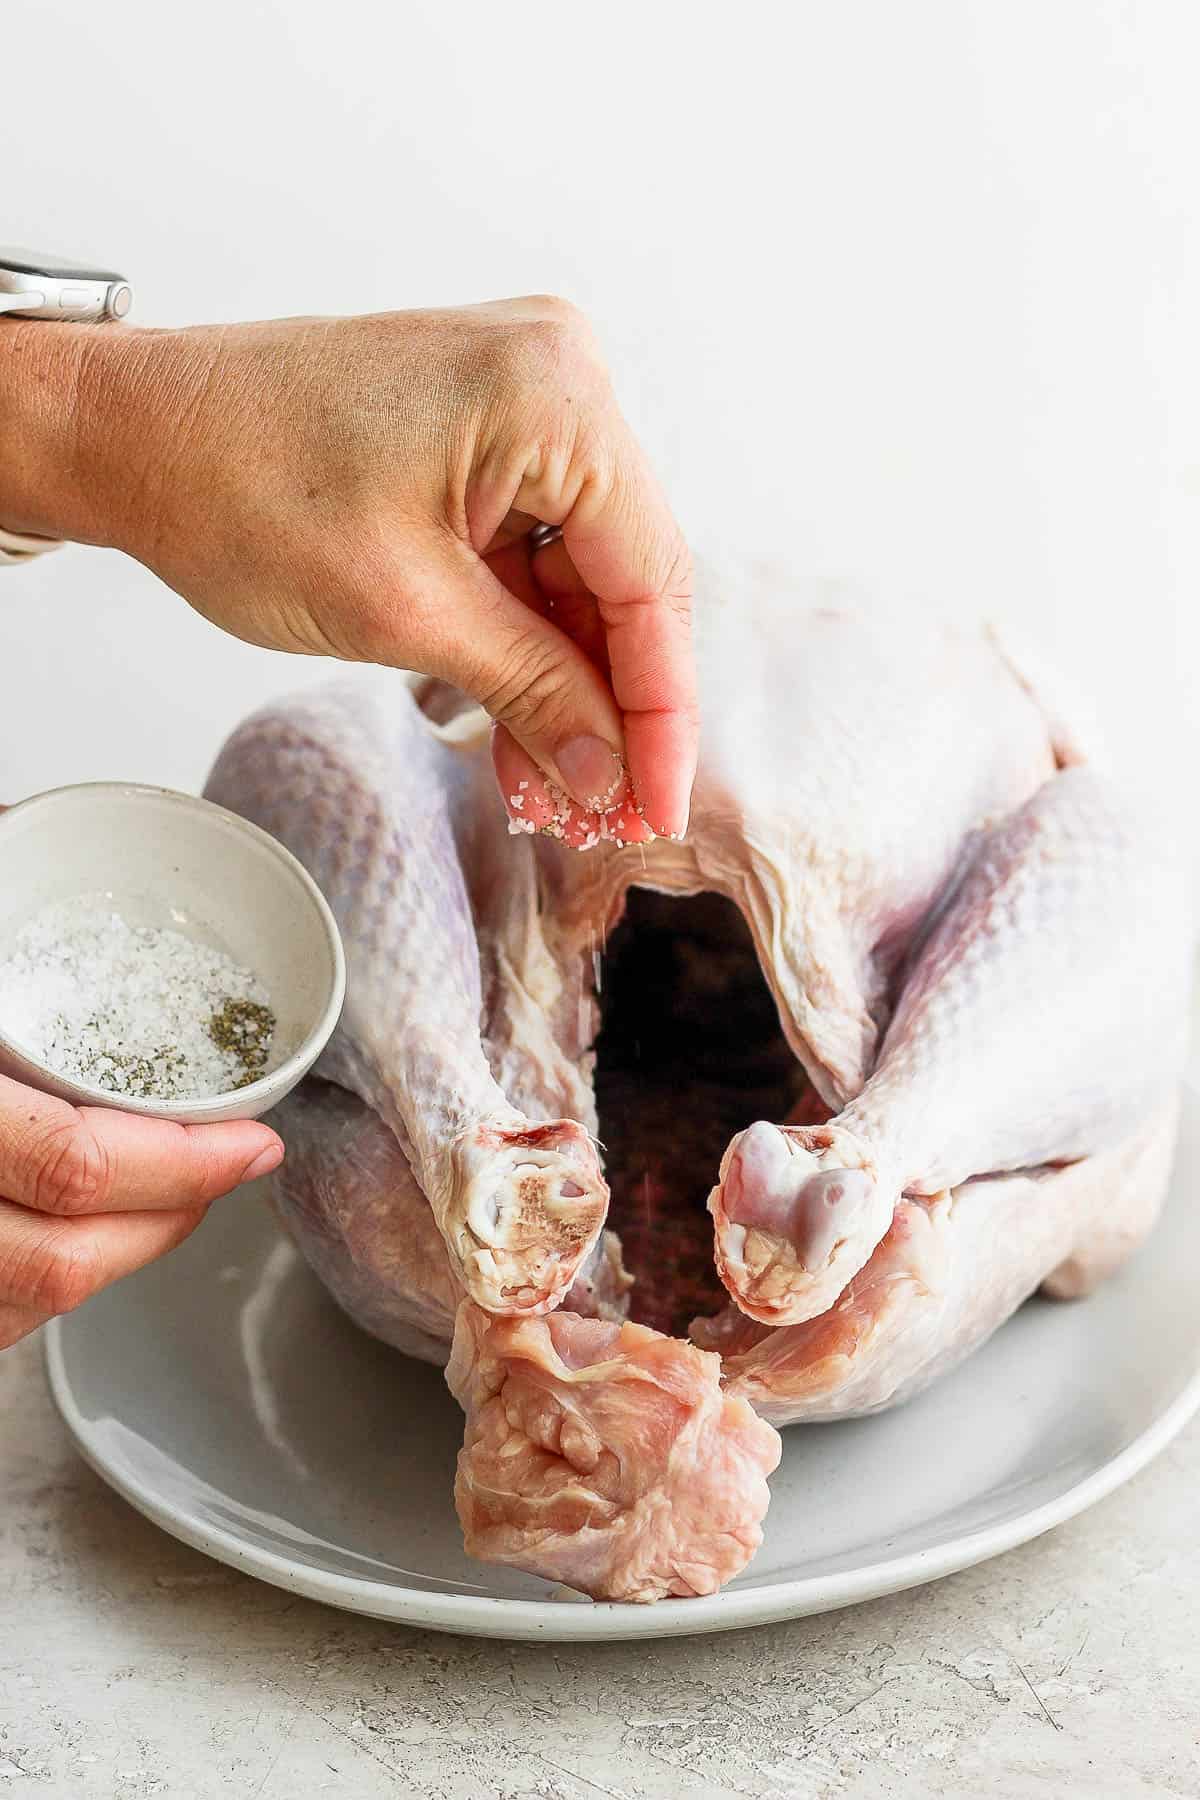 Salt and pepper being sprinkled in the turkey cavity.